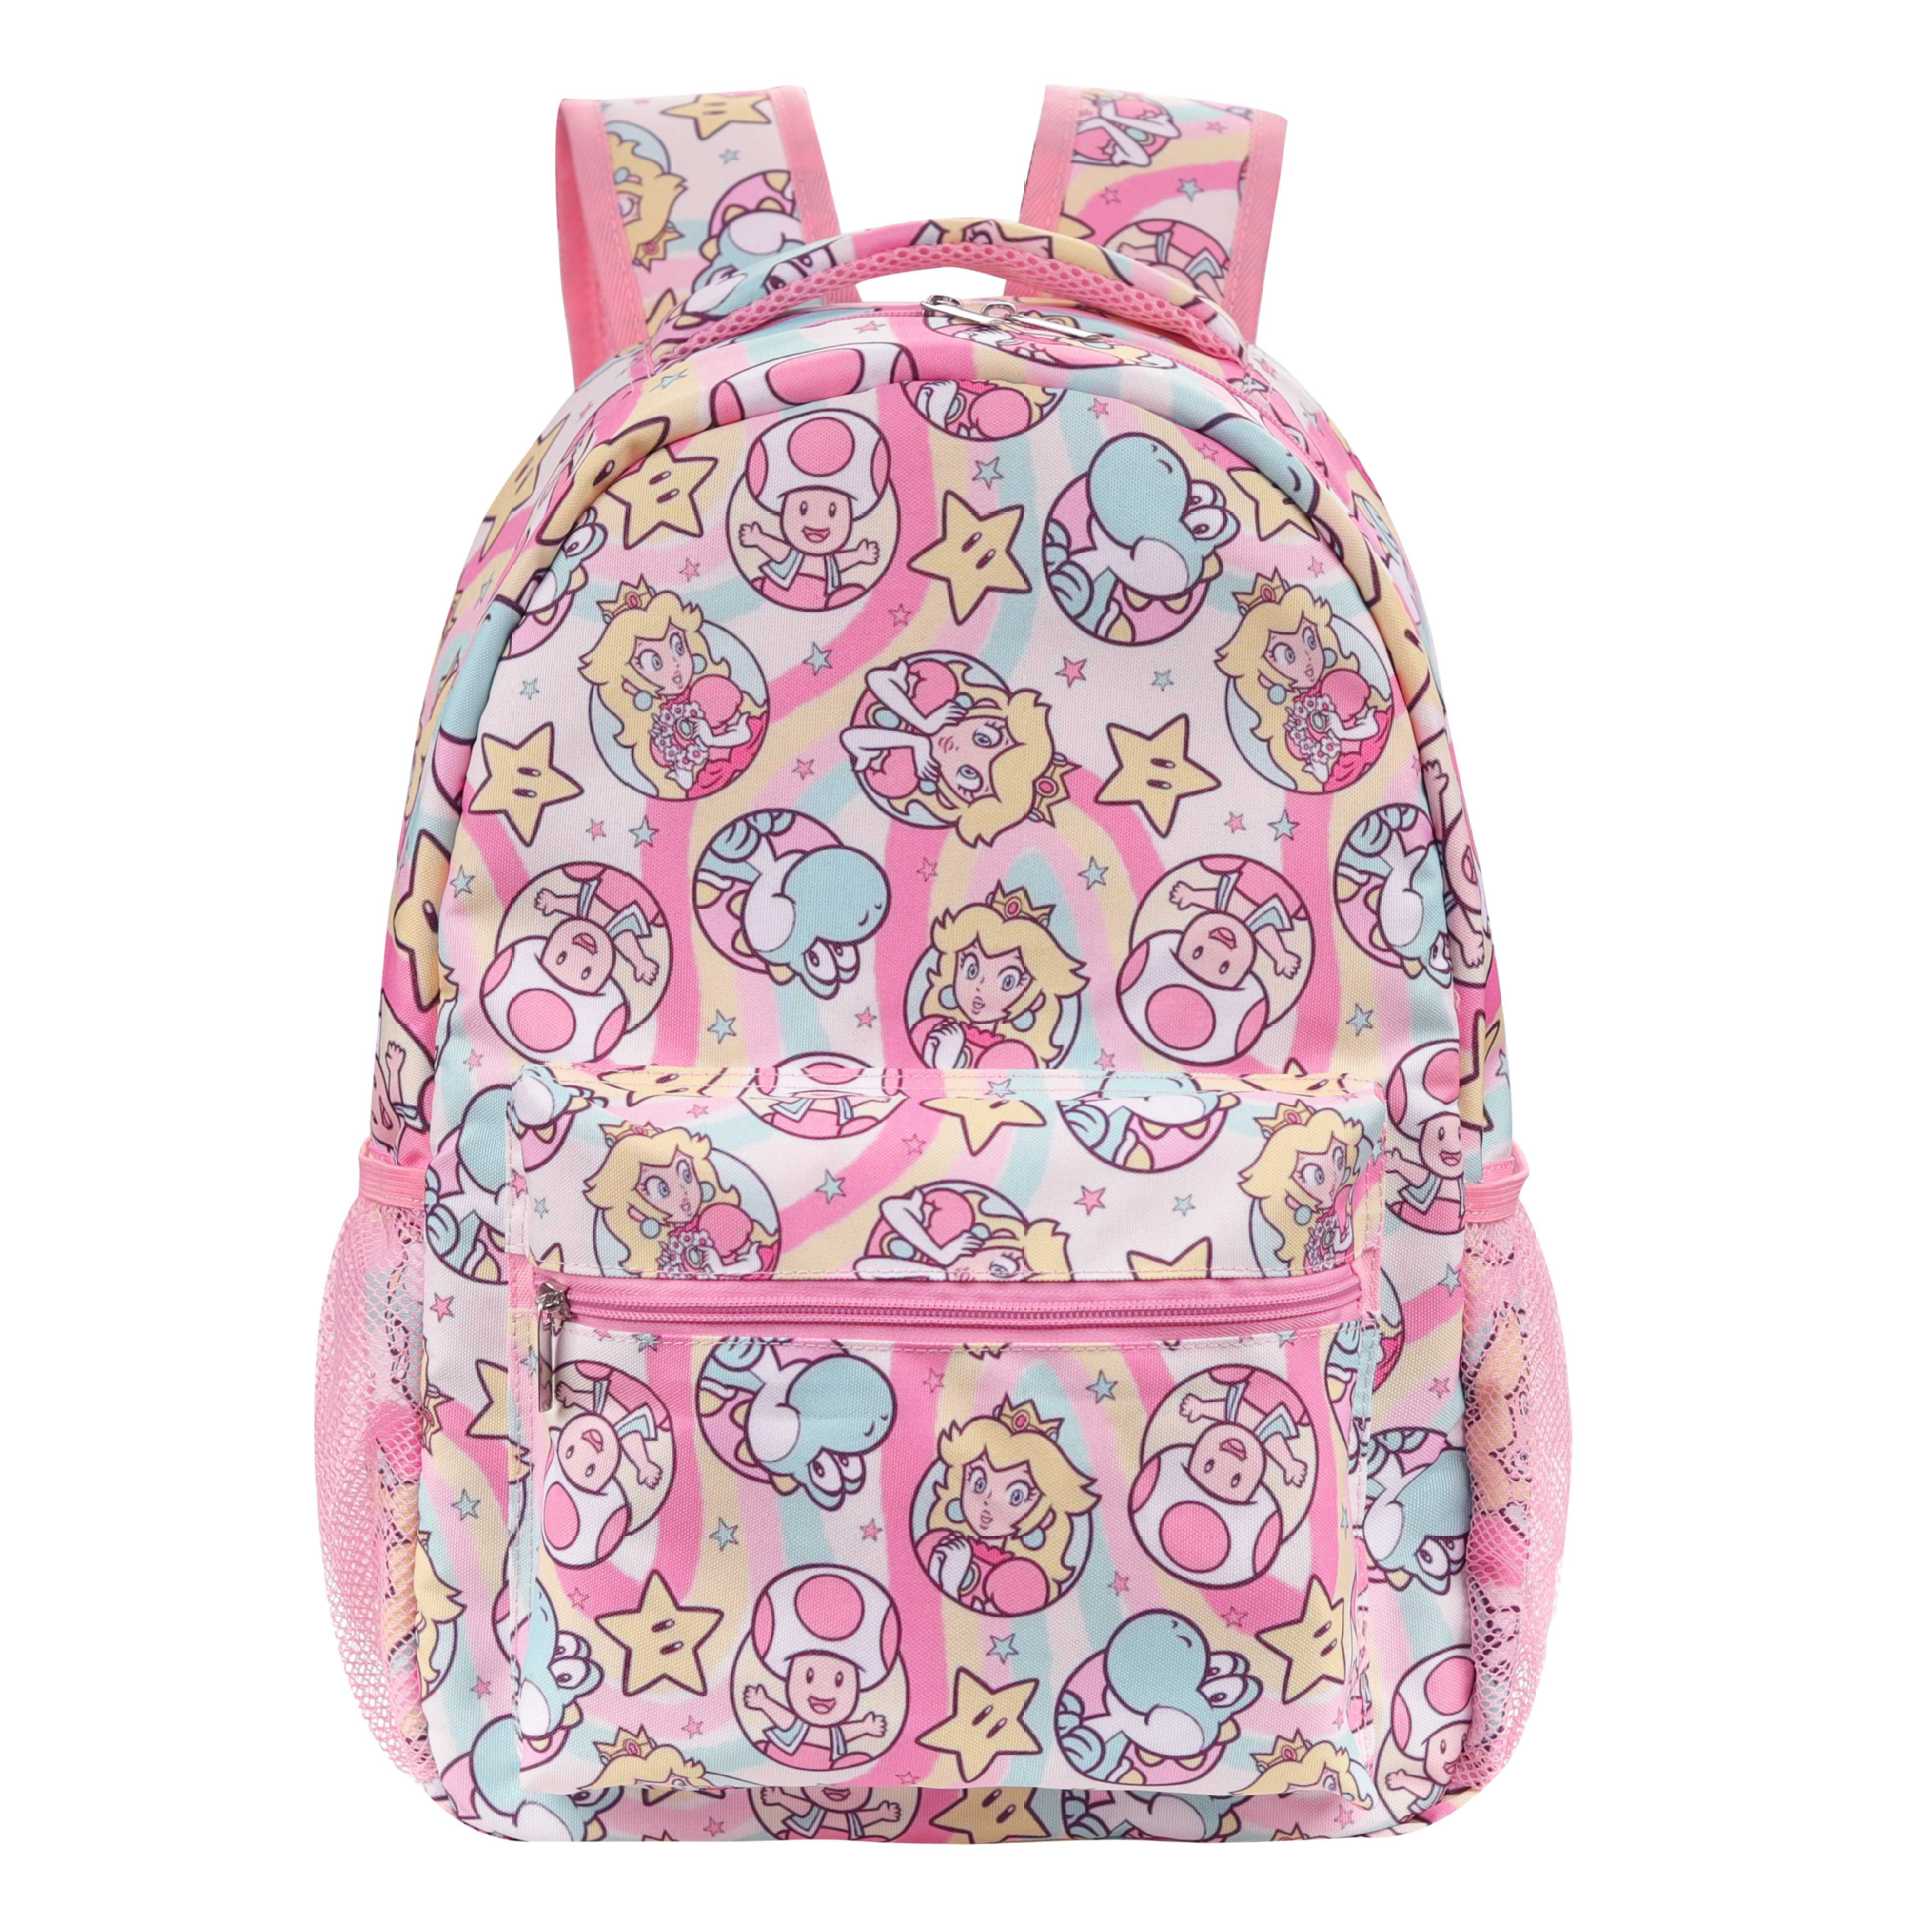 Princess Peach Backpack for Kids Girl's Princess Peach School Backpack Ideal Present